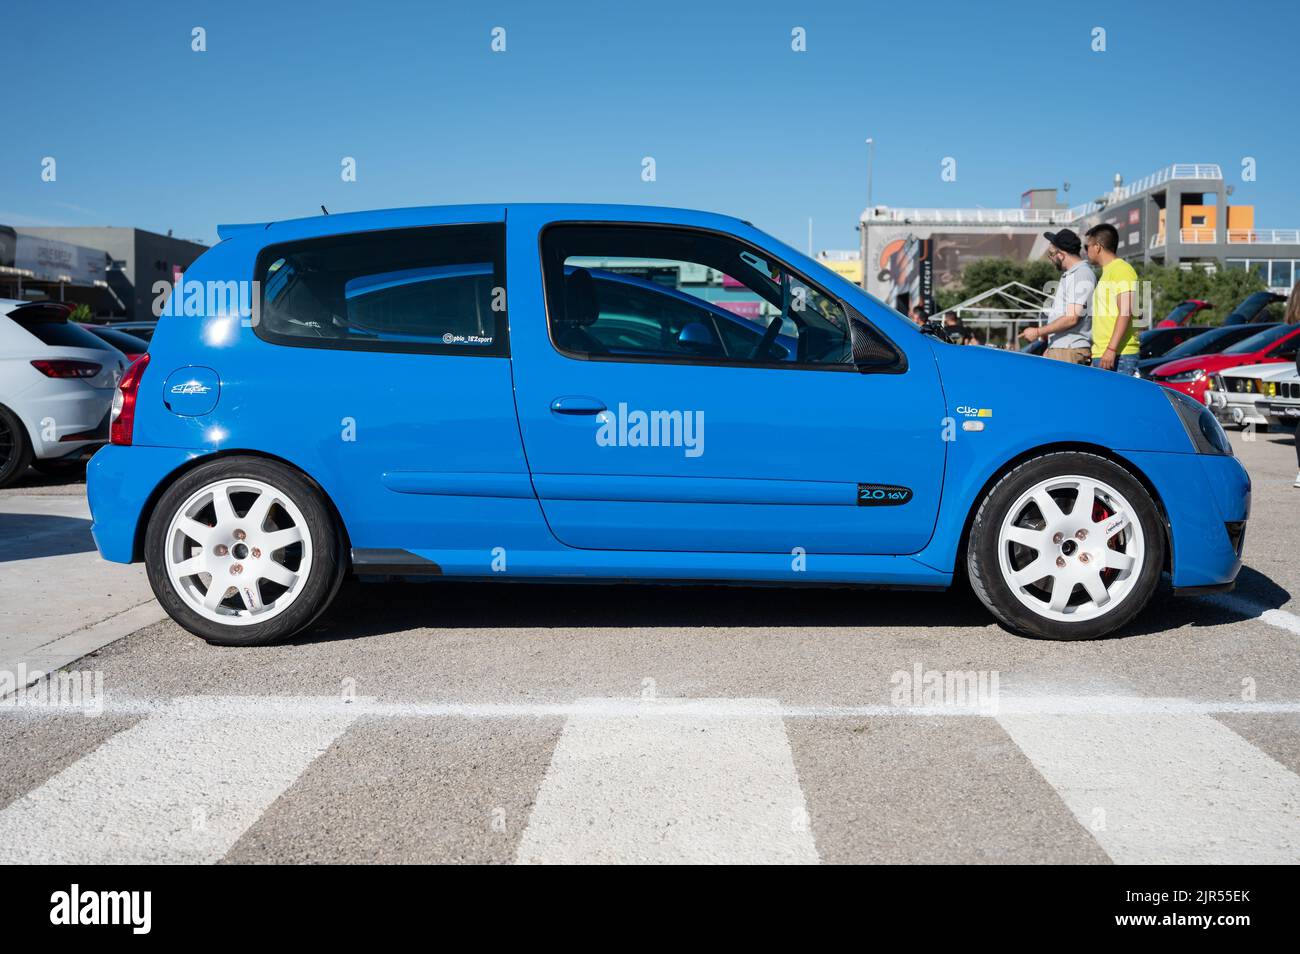 A Renault Clio second generation phase 2 blue color parked on the street Stock Photo